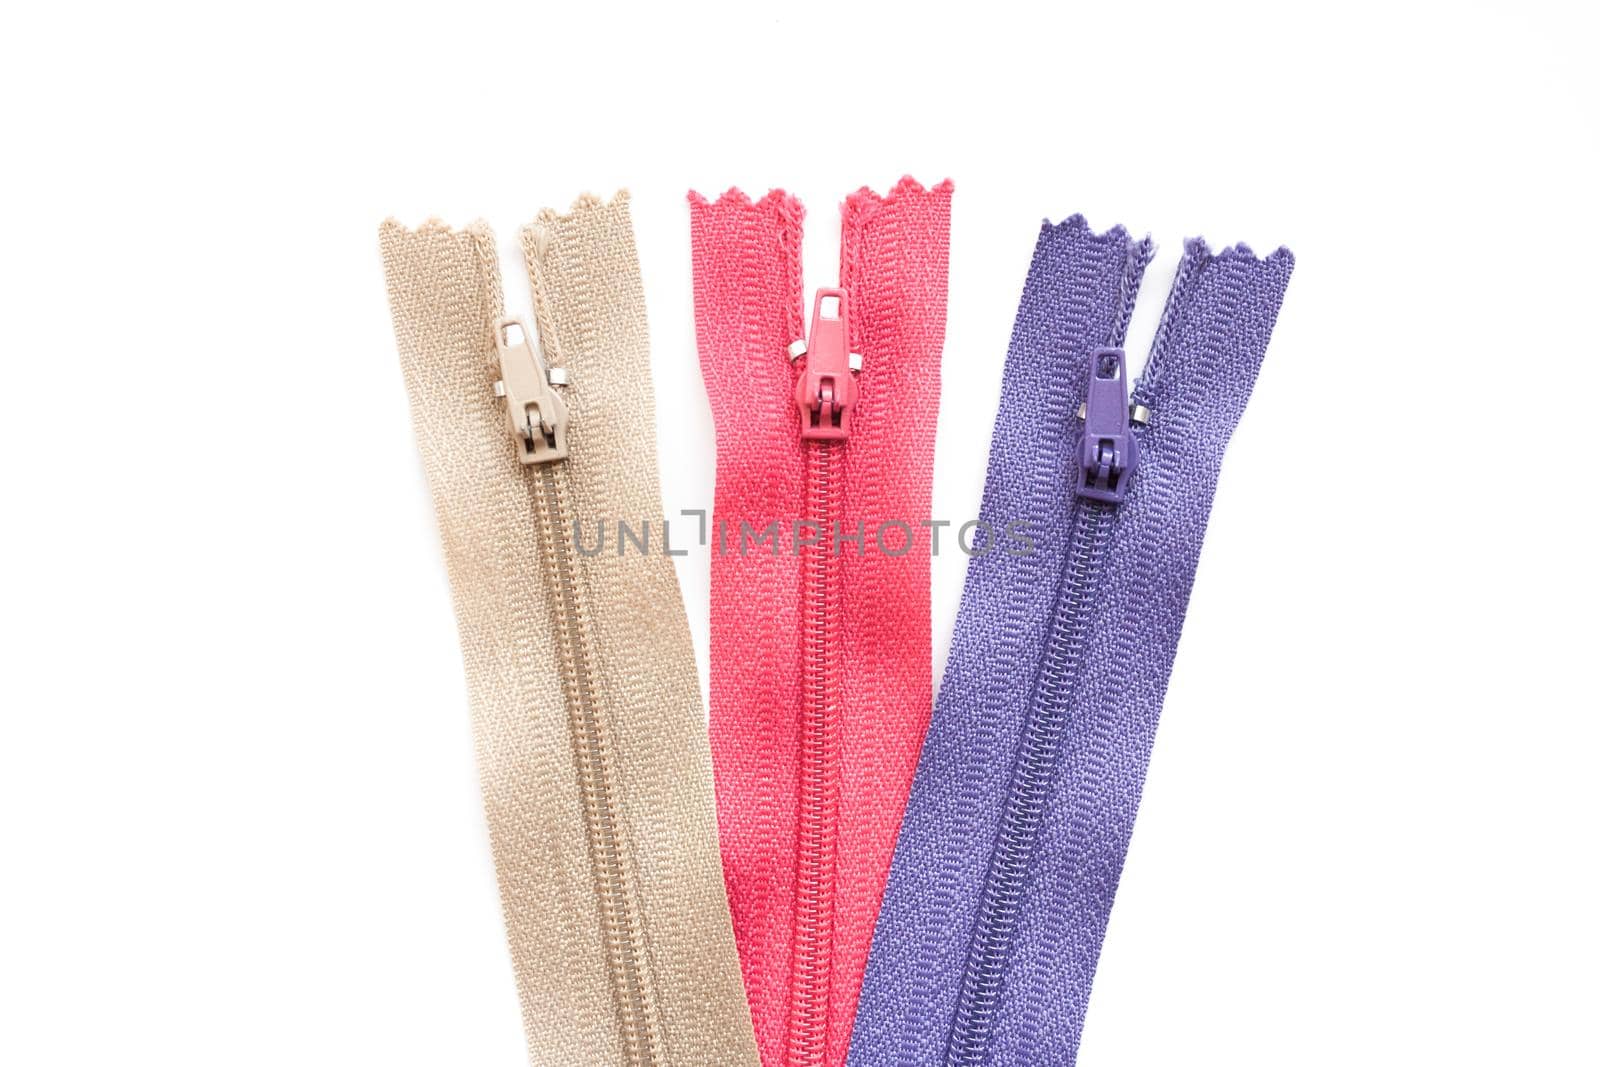 Zipper collection isolated on white background. Clothing fastener colorful set